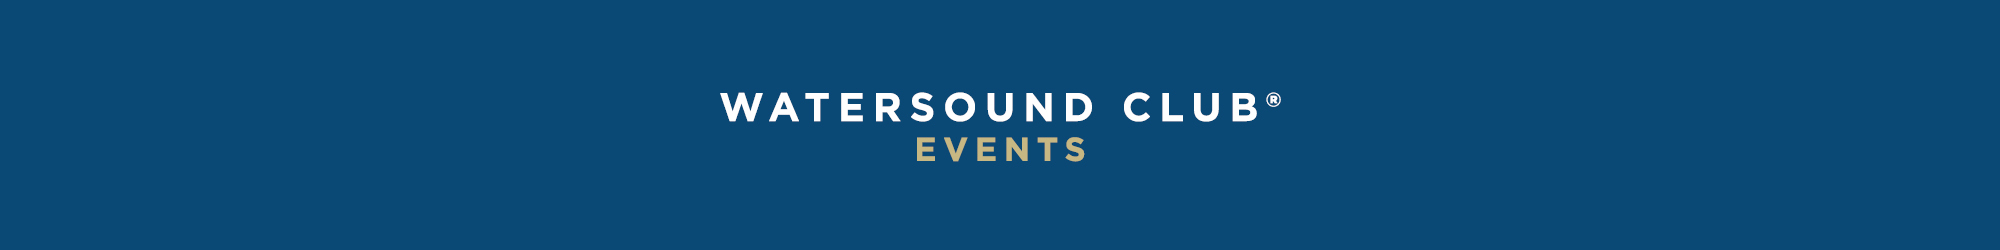 Watersound Club® Events